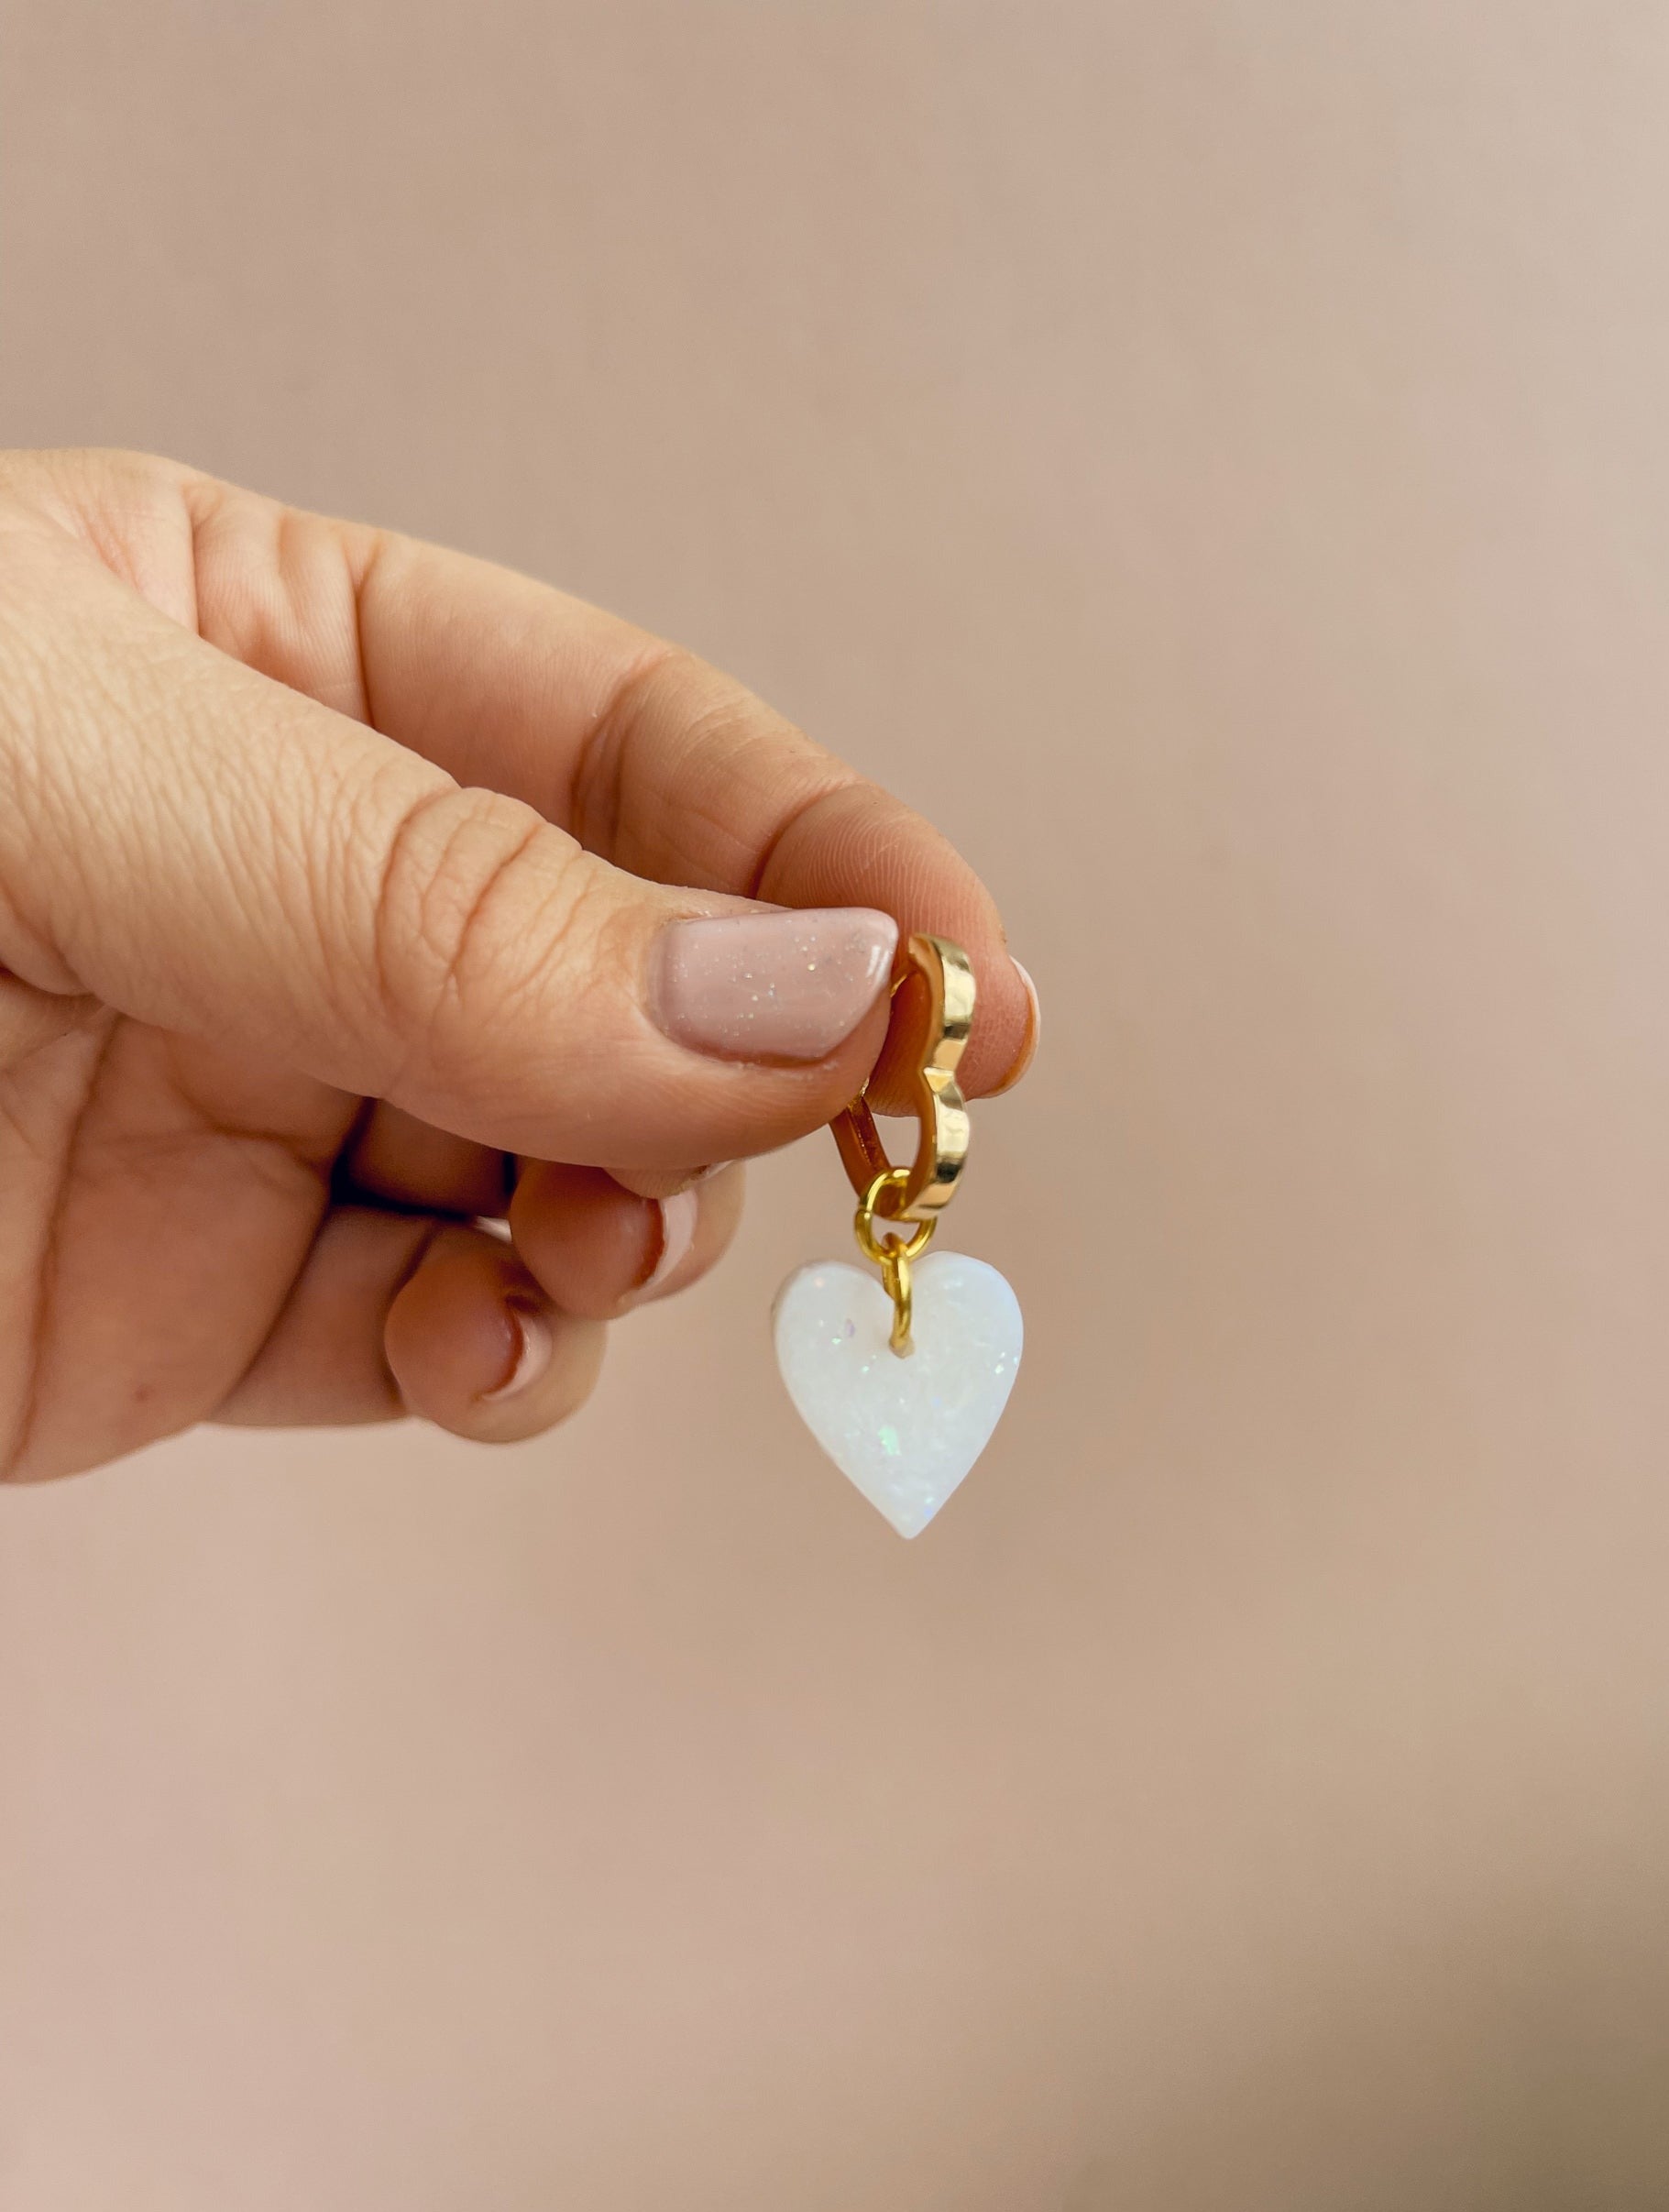 Heart Huggies with Pearlescent Heart charms